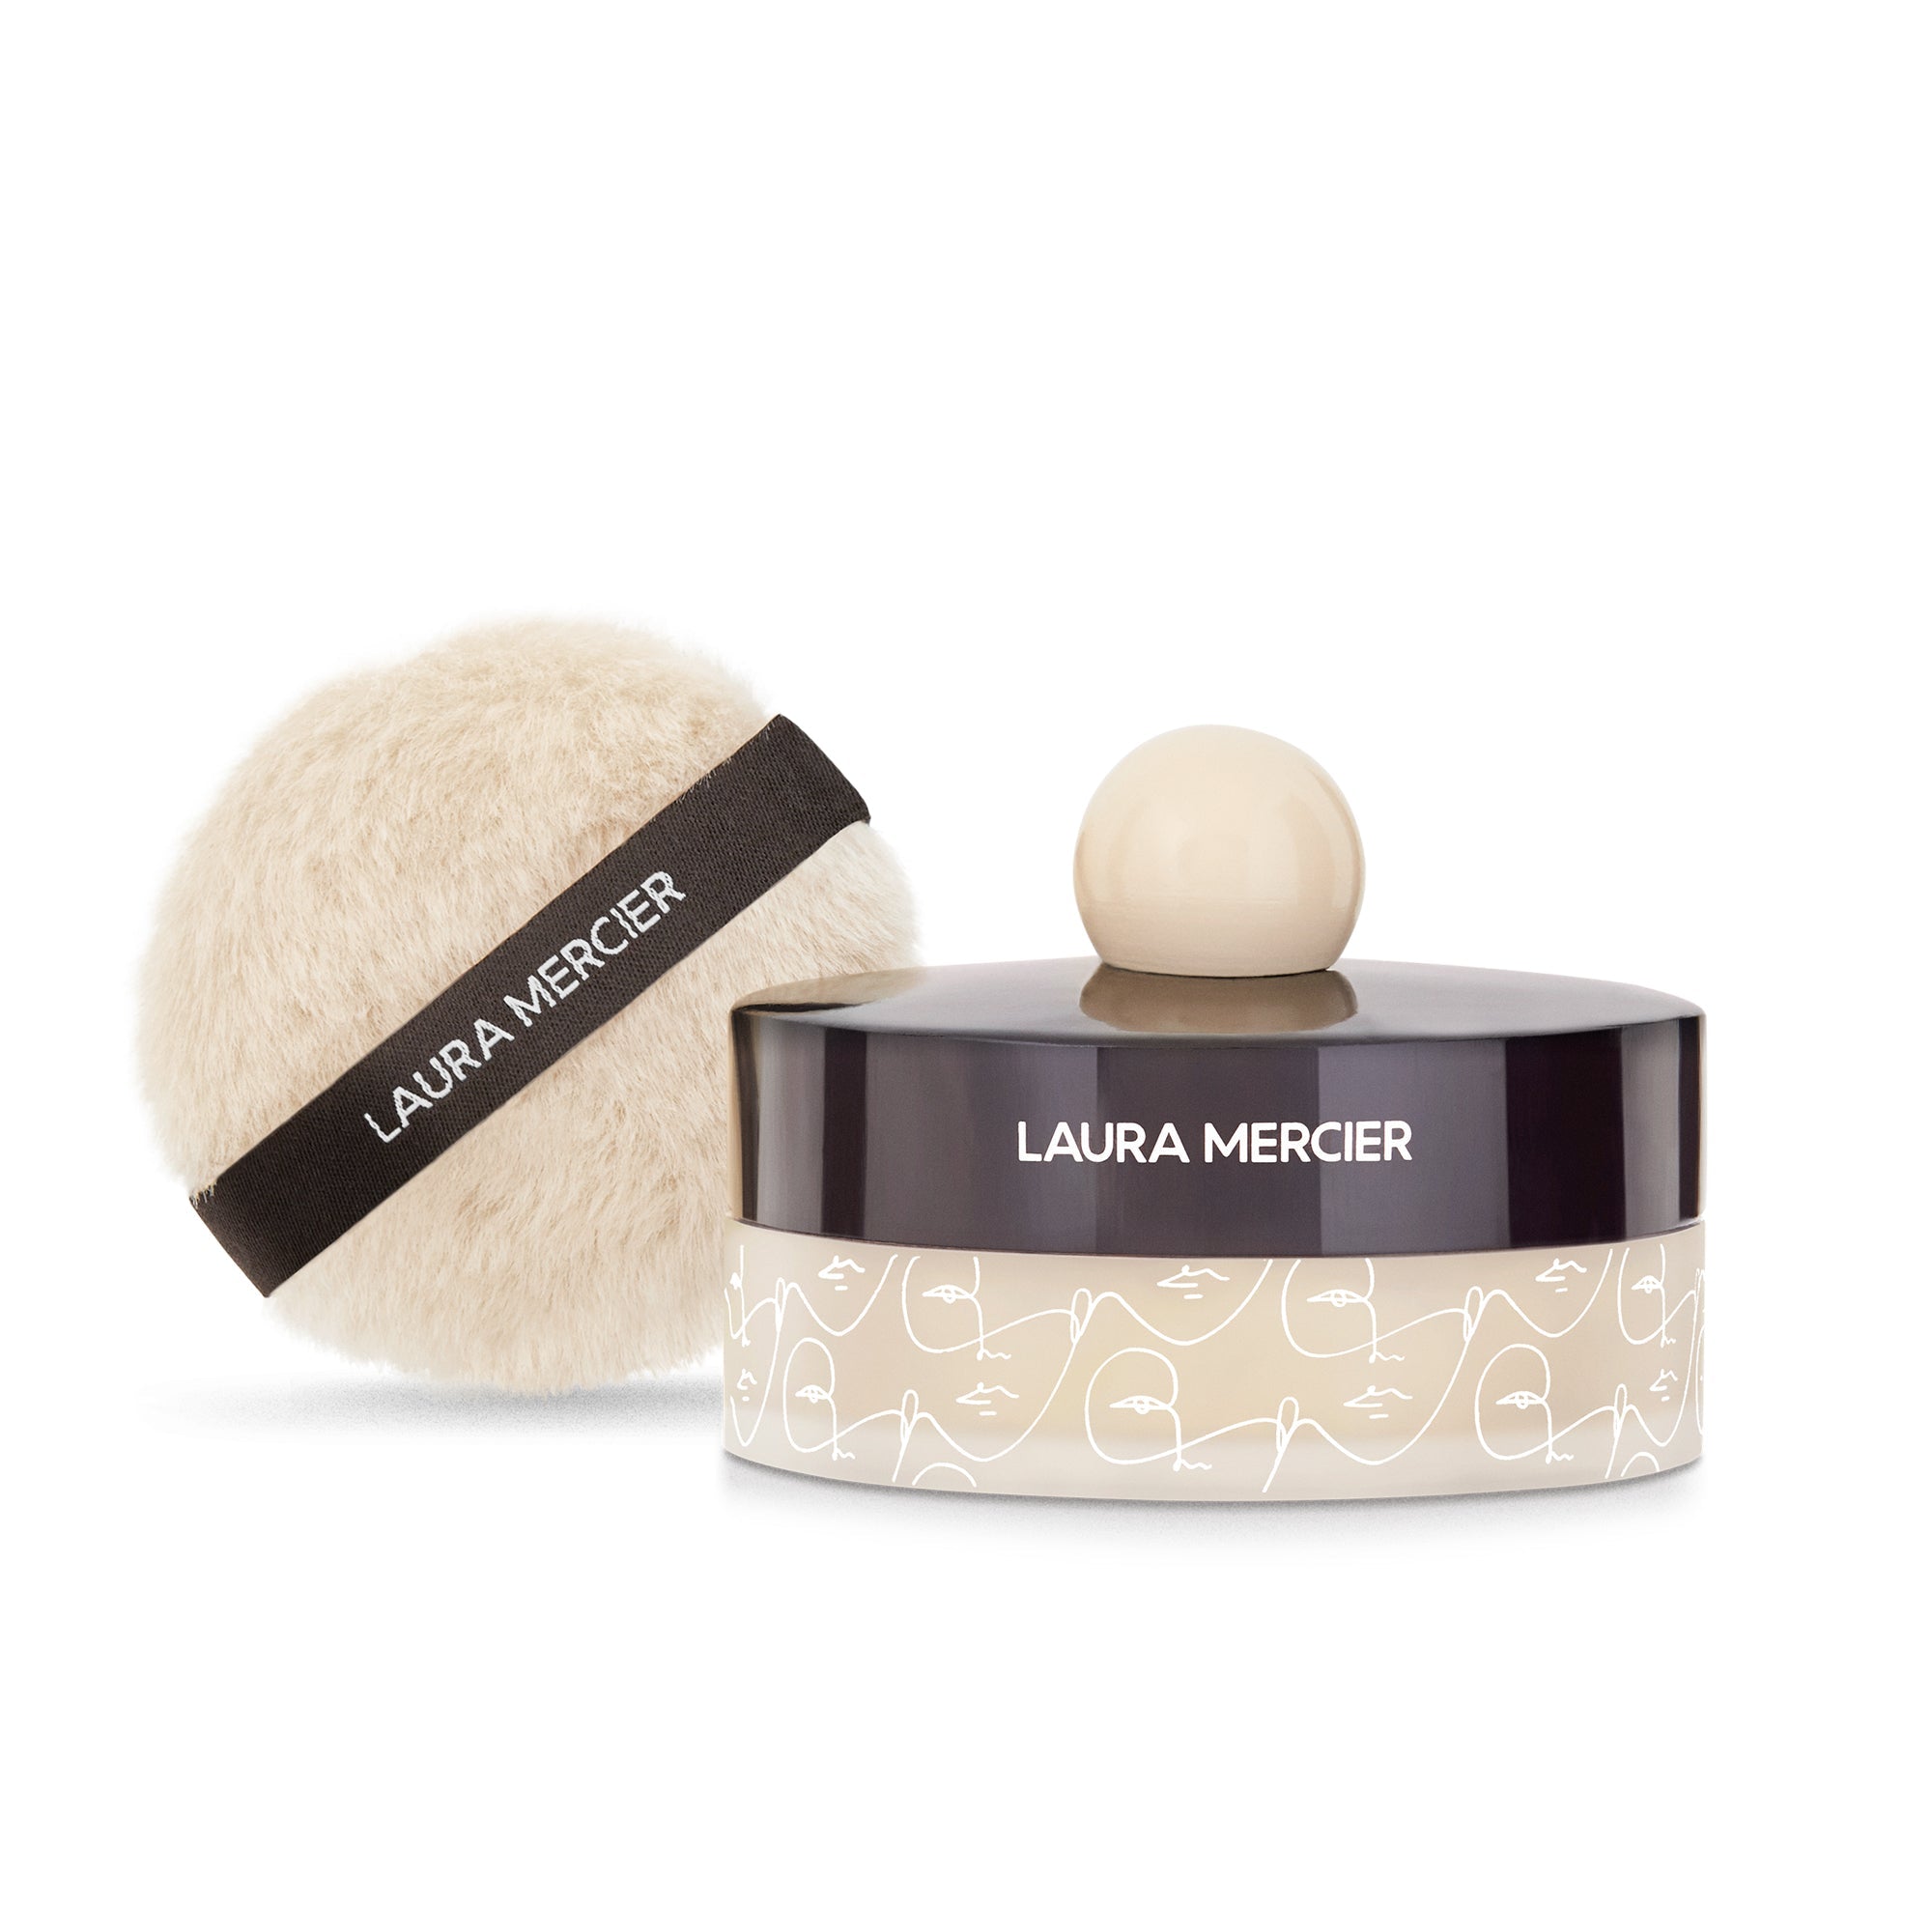 Translucent Loose Setting Powder Luxe Jumbo View 1